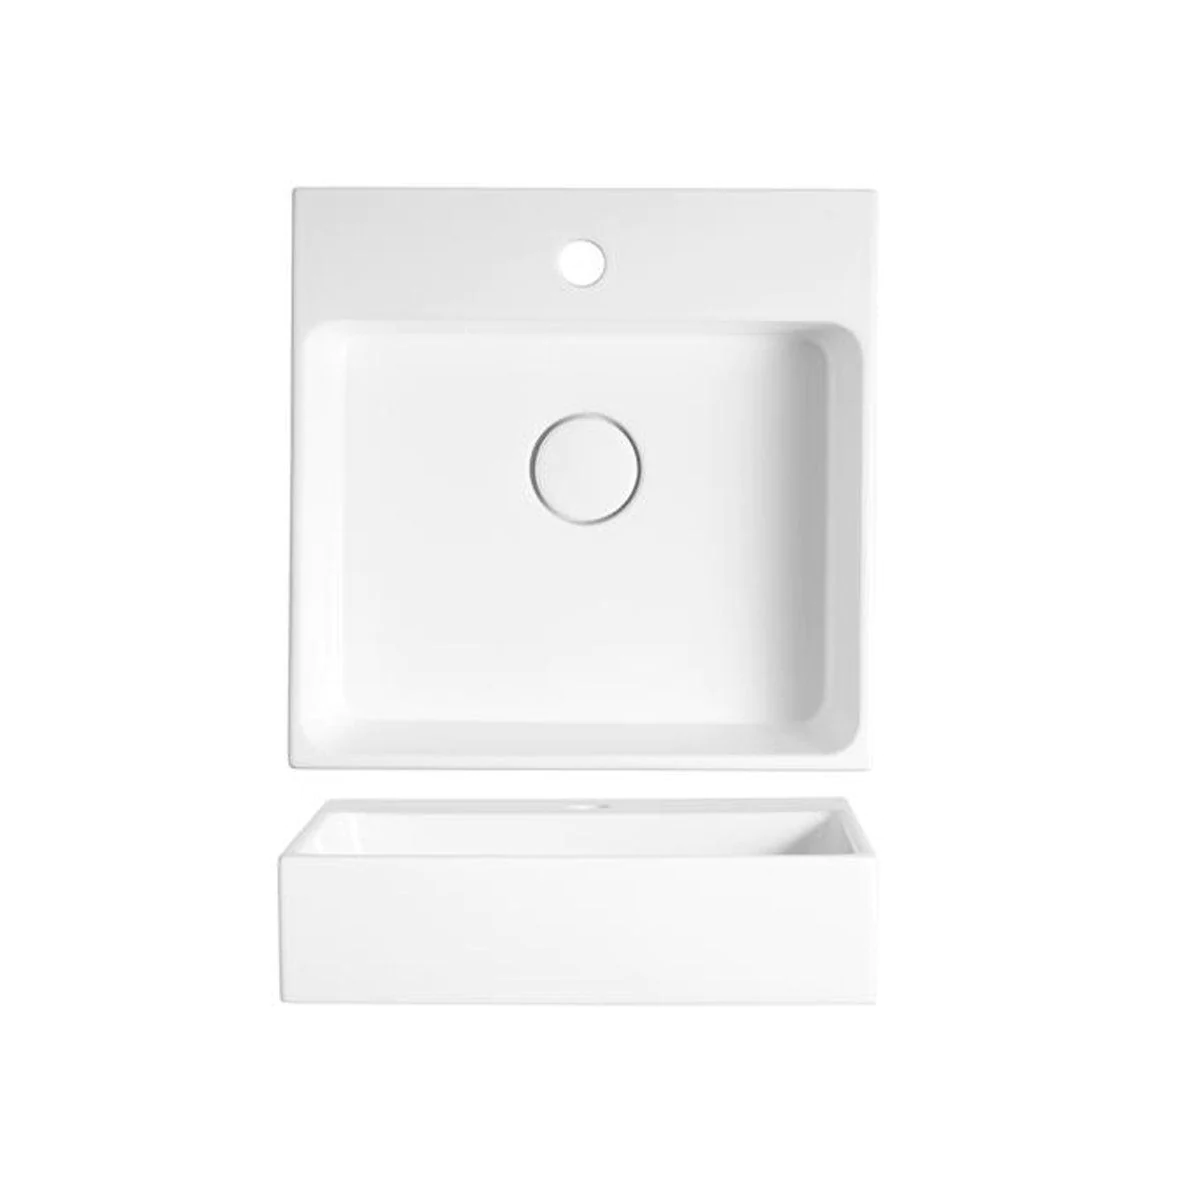 VEROTTI LAVENDER ABOVE COUNTER/WALL MOUNTED FIRECLAY BASIN GLOSS WHITE 500MM